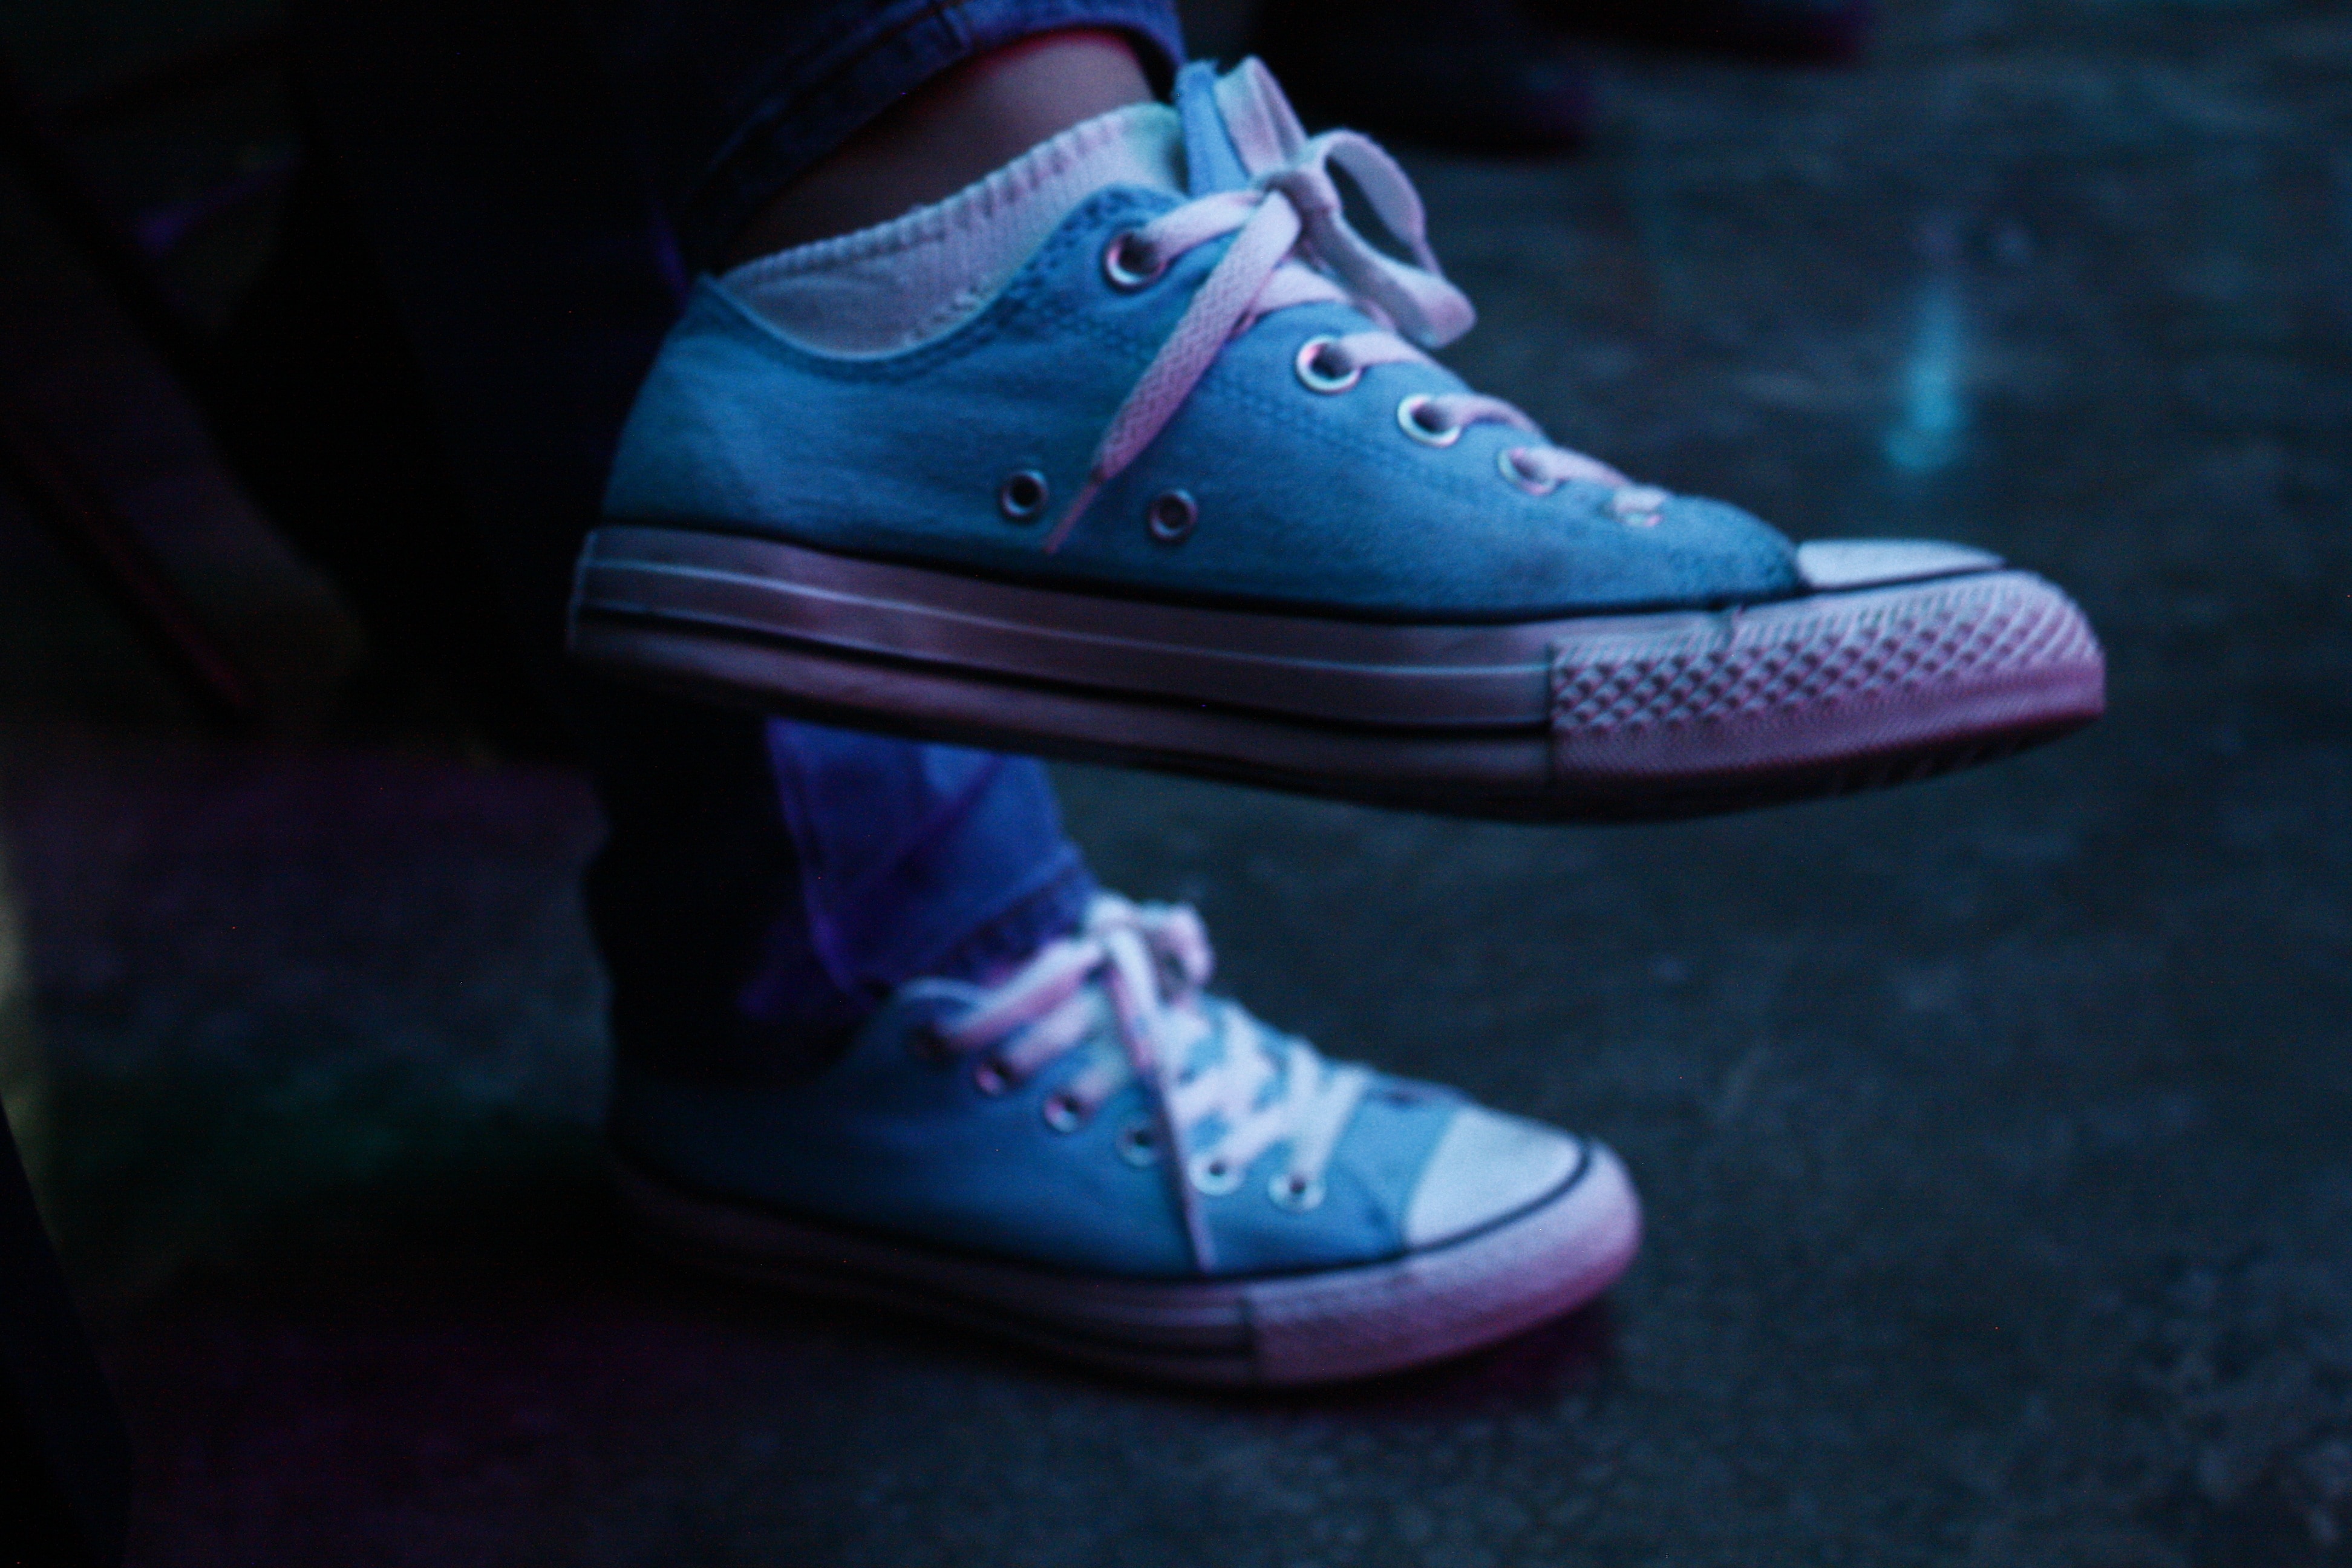 teal converse all star low top